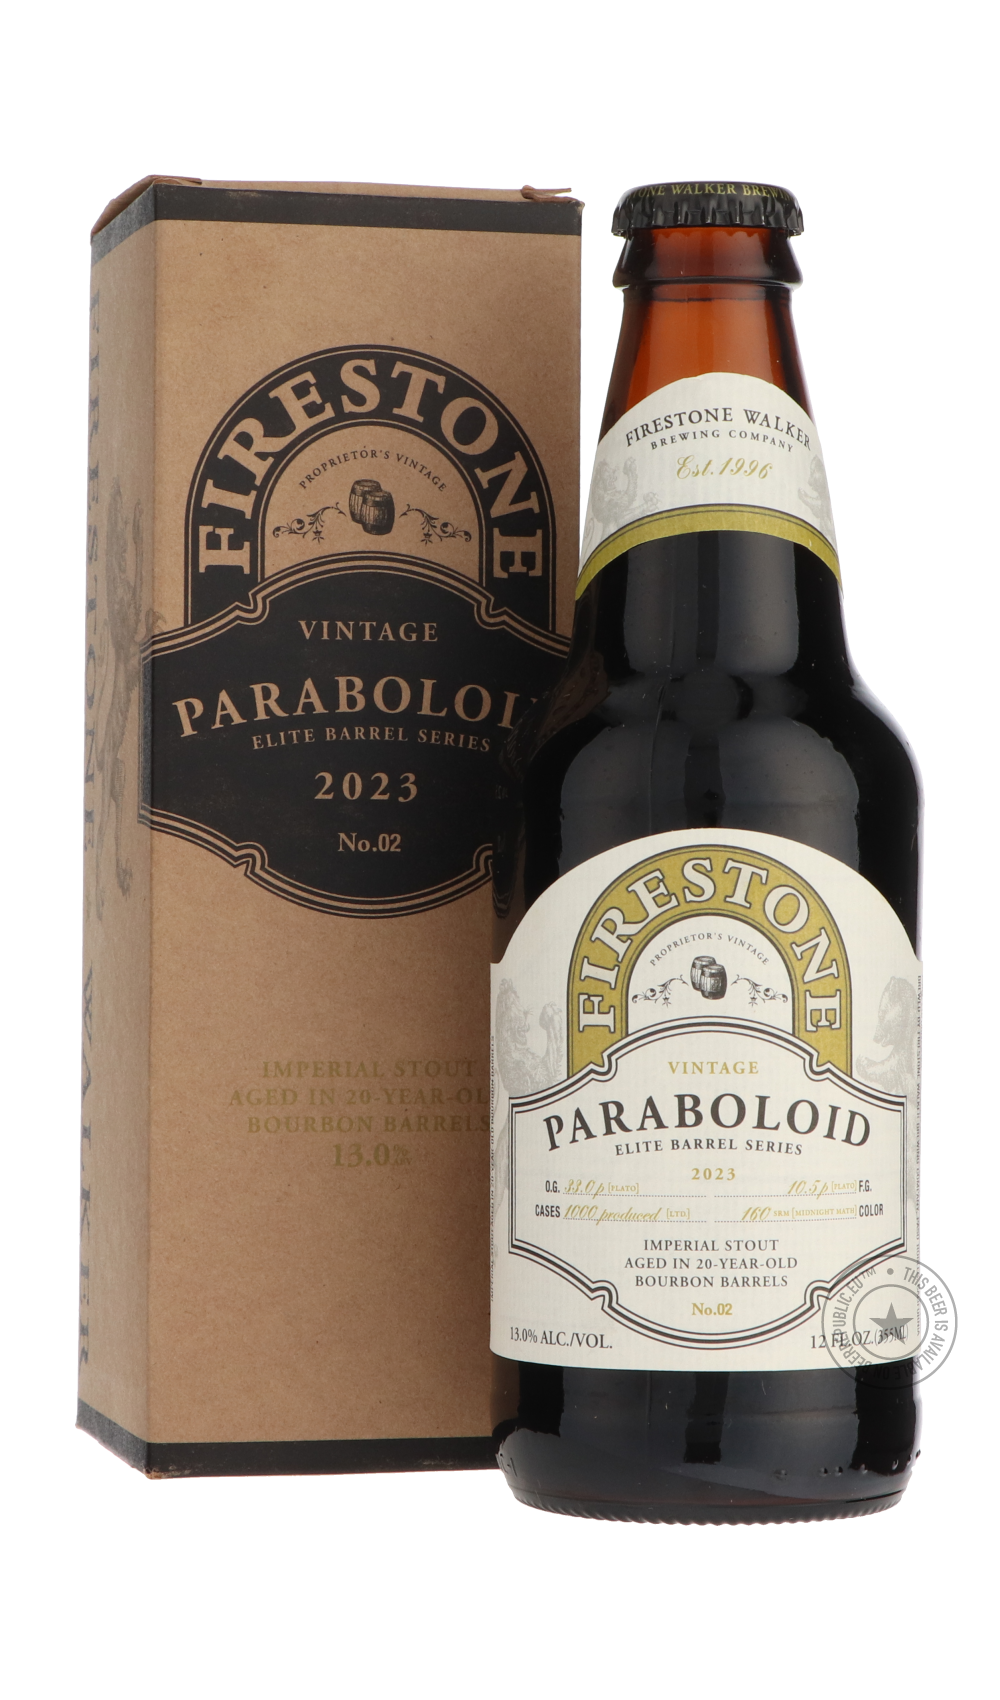 -Firestone Walker- Paraboloid 2023-Stout & Porter- Only @ Beer Republic - The best online beer store for American & Canadian craft beer - Buy beer online from the USA and Canada - Bier online kopen - Amerikaans bier kopen - Craft beer store - Craft beer kopen - Amerikanisch bier kaufen - Bier online kaufen - Acheter biere online - IPA - Stout - Porter - New England IPA - Hazy IPA - Imperial Stout - Barrel Aged - Barrel Aged Imperial Stout - Brown - Dark beer - Blond - Blonde - Pilsner - Lager - Wheat - Weiz